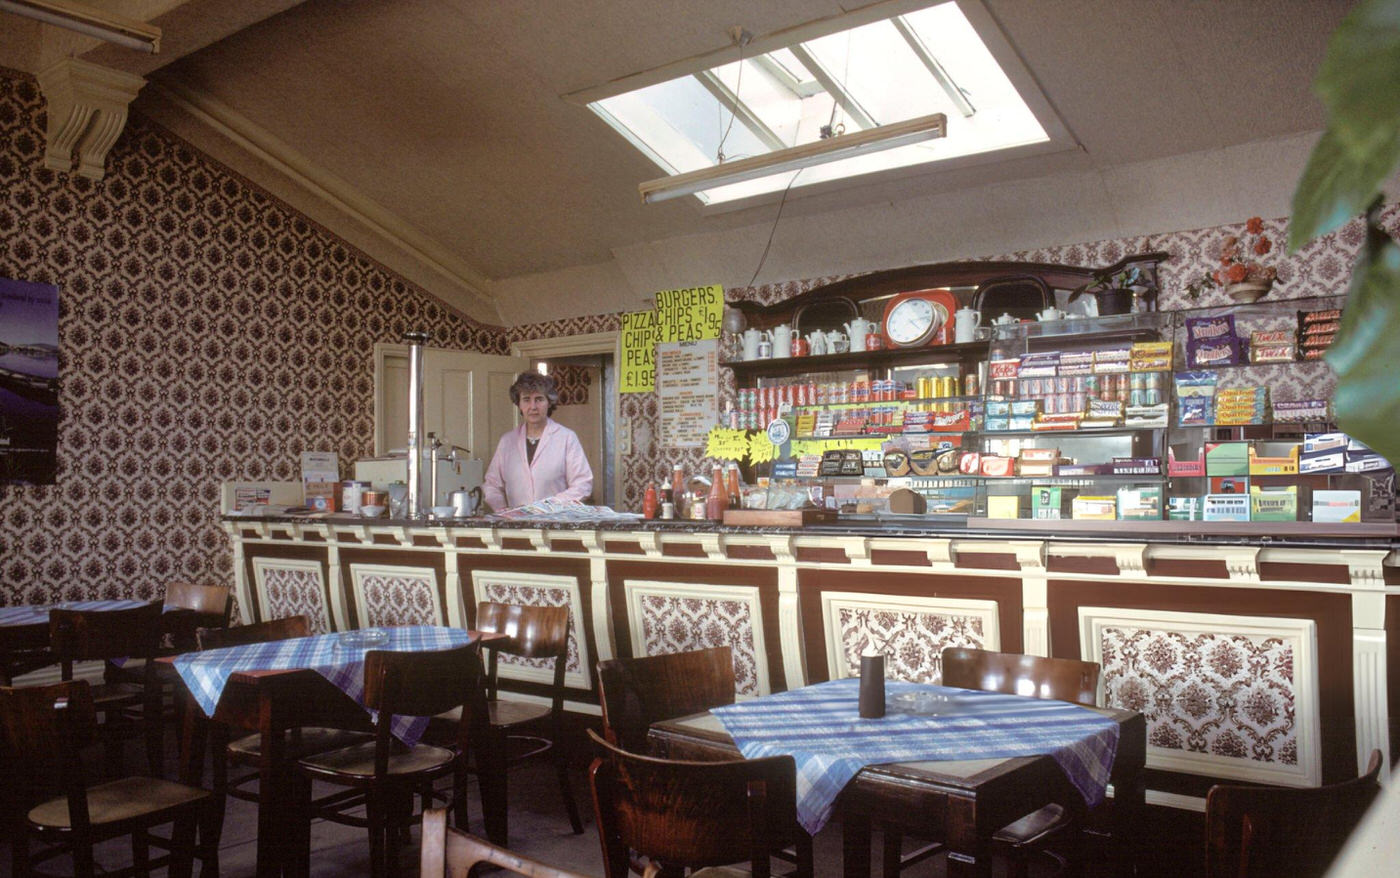 Inside the cafe at Malton station, North Yorkshire, 1980s.